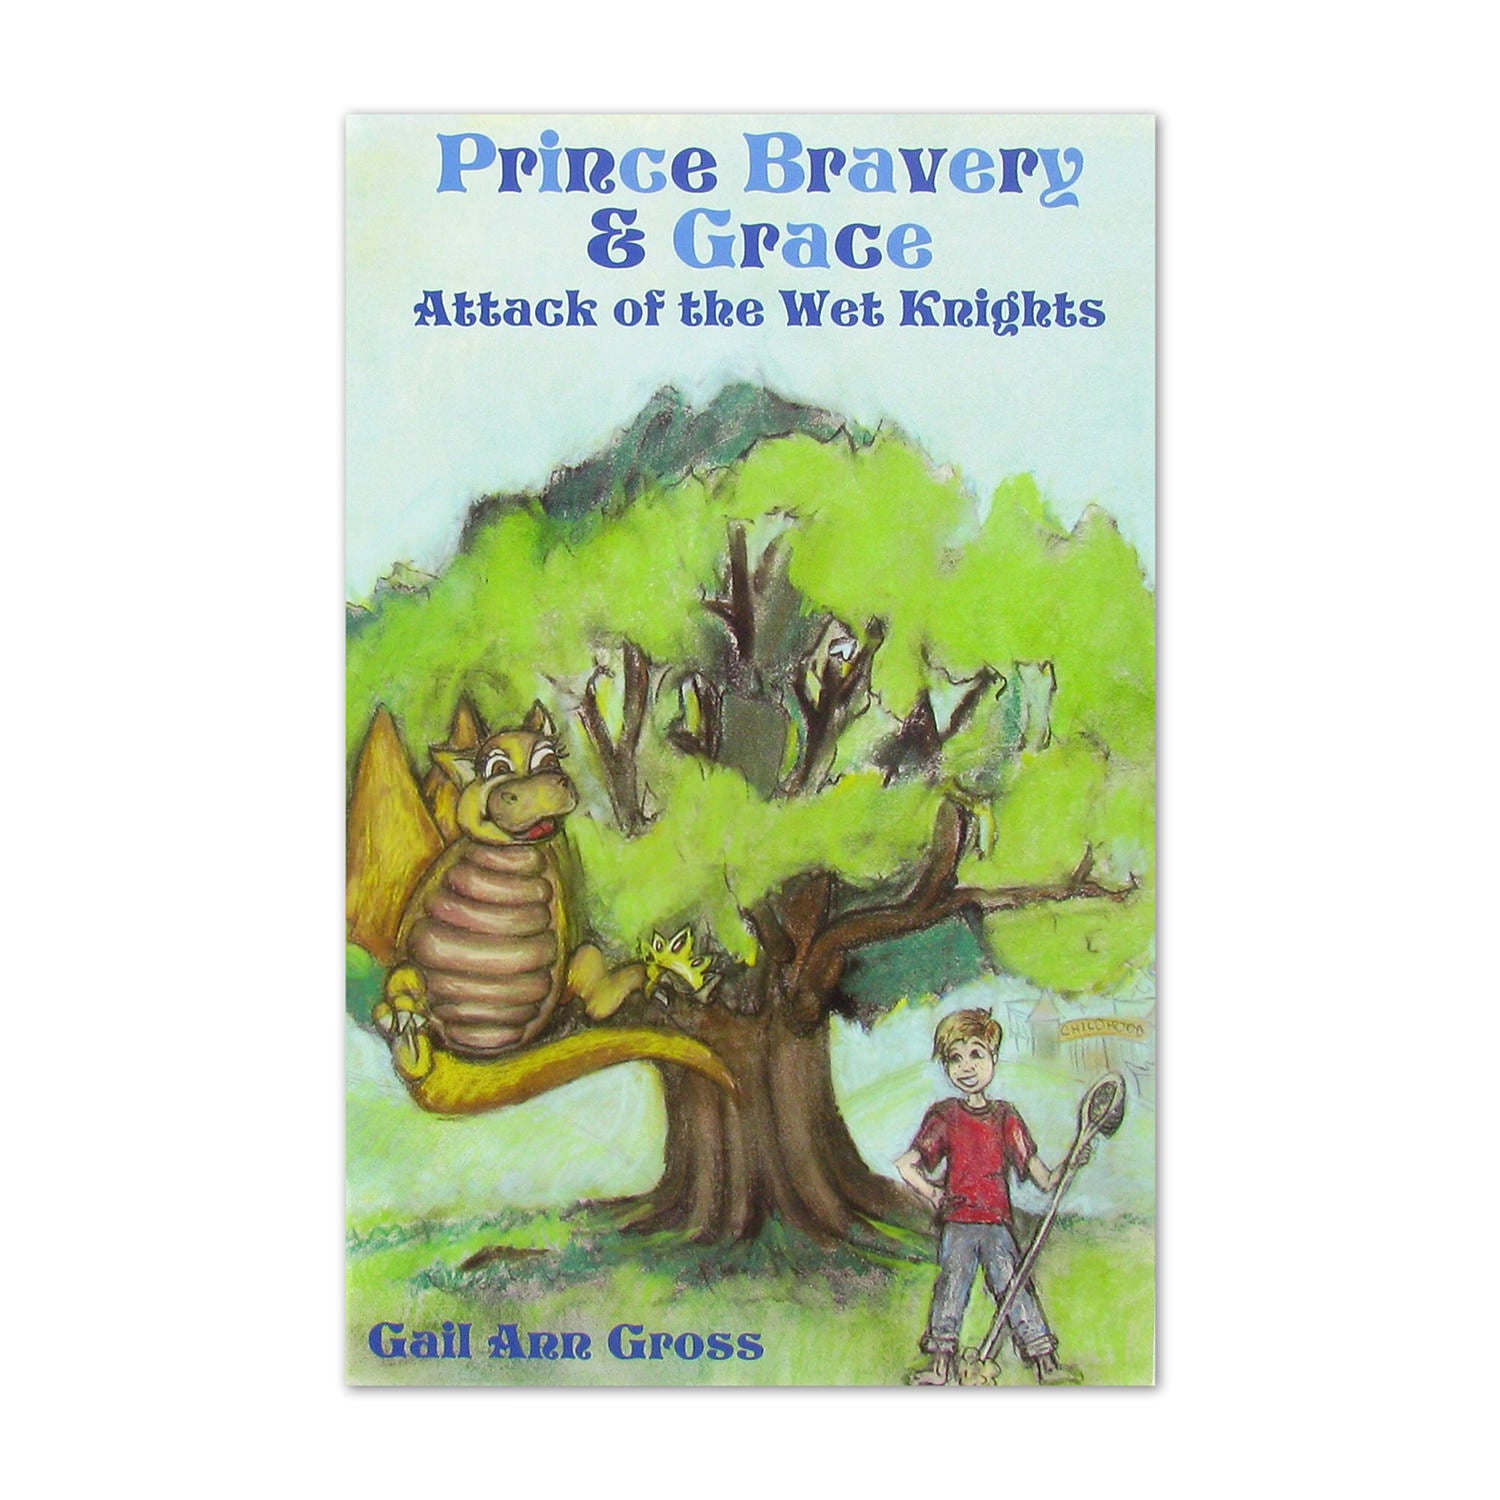 Books-Prince Bravery & Grace: Attack of the Wet Knights